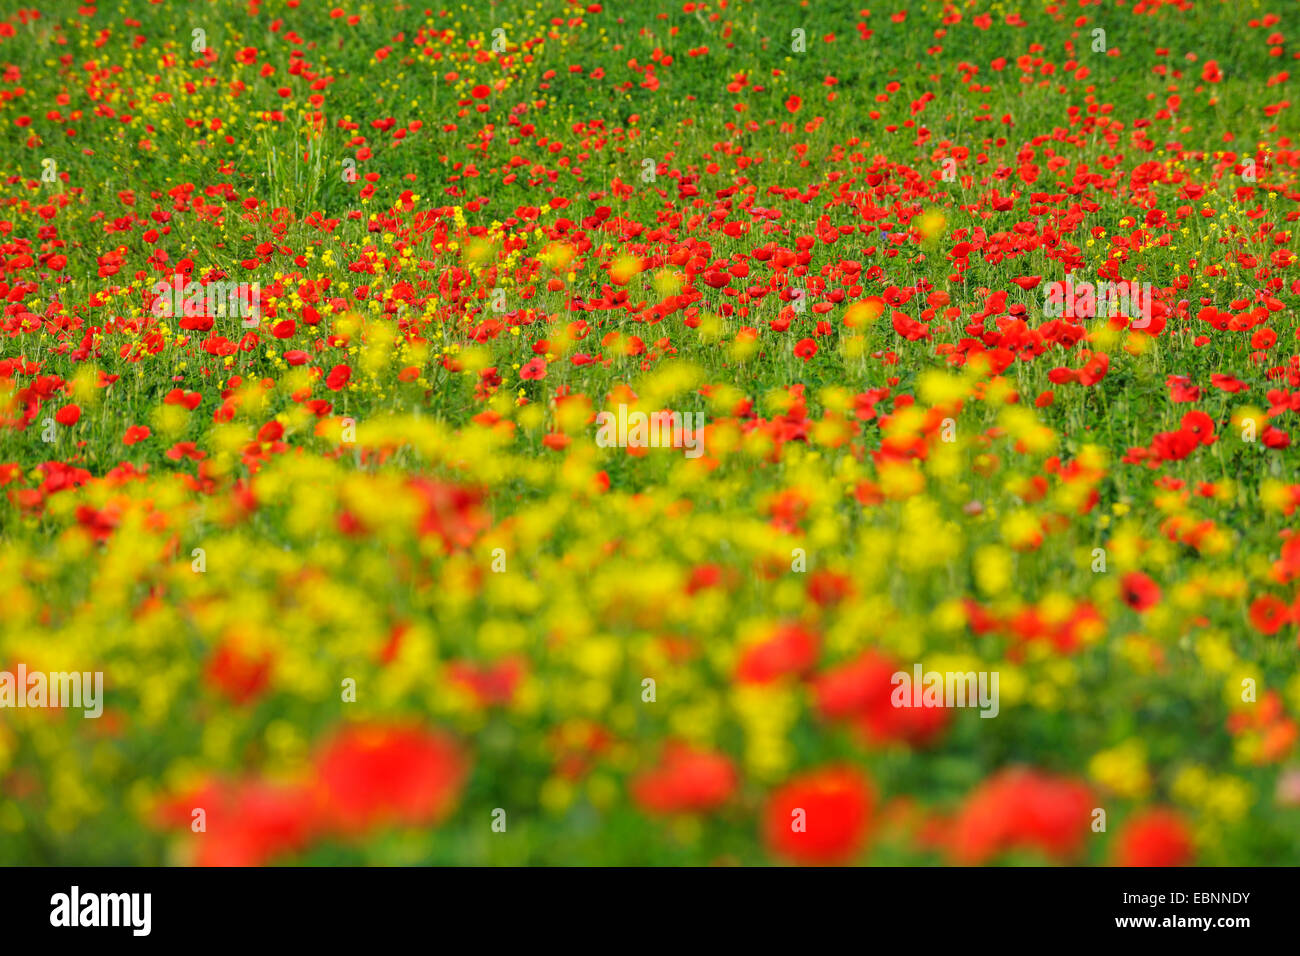 Common poppy, Corn poppy, Red poppy (Papaver rhoeas), Poppies in Meadow, Spring, Val d' Orcia, San Quirico d' Orcia, Italy, Tuscany Stock Photo